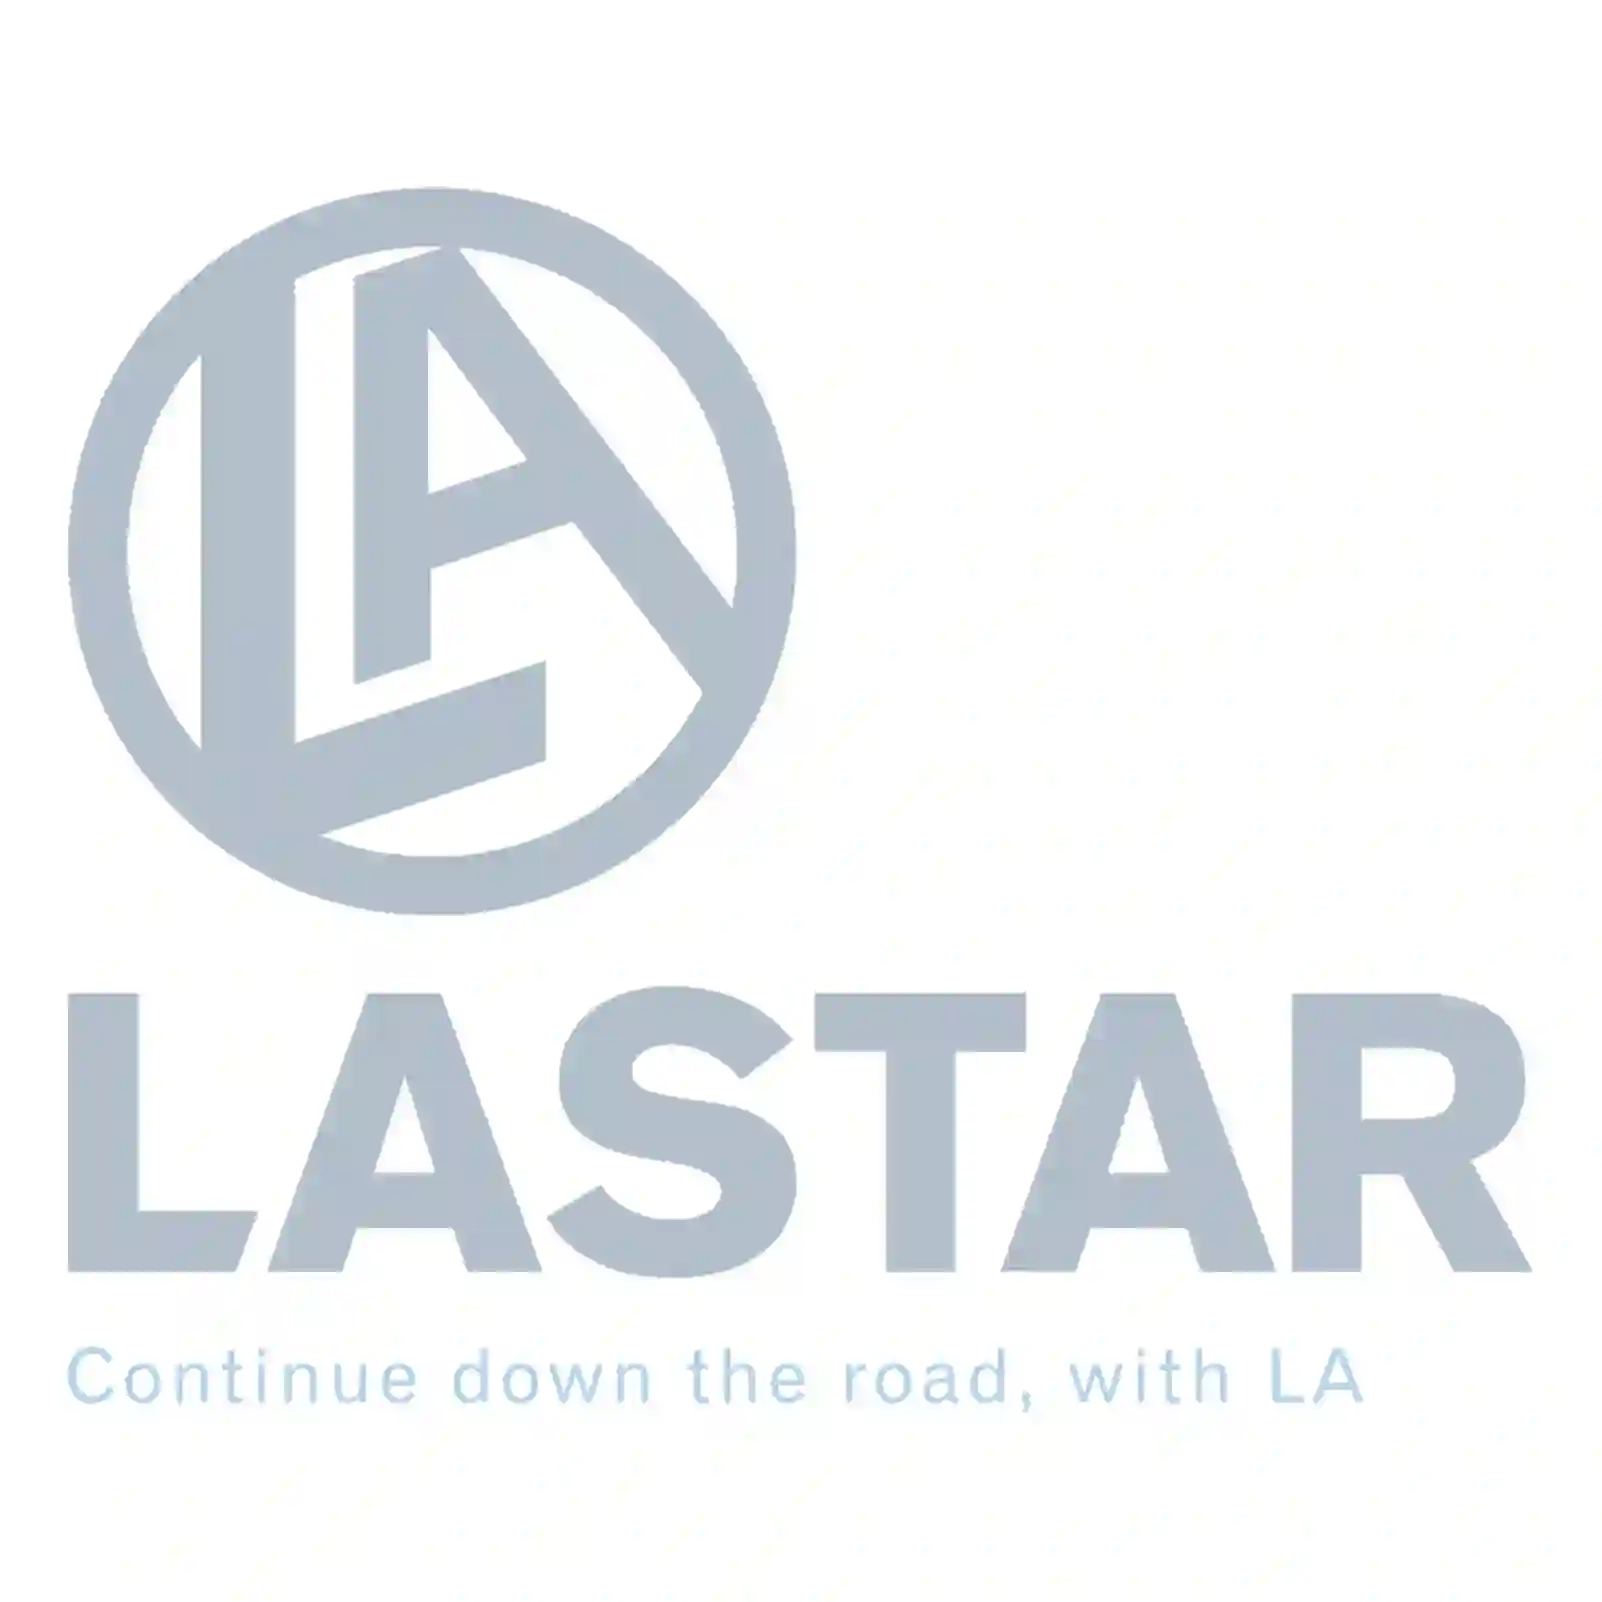  Disc brake pad kit, without springs, with wear indicators || Lastar Spare Part | Truck Spare Parts, Auotomotive Spare Parts